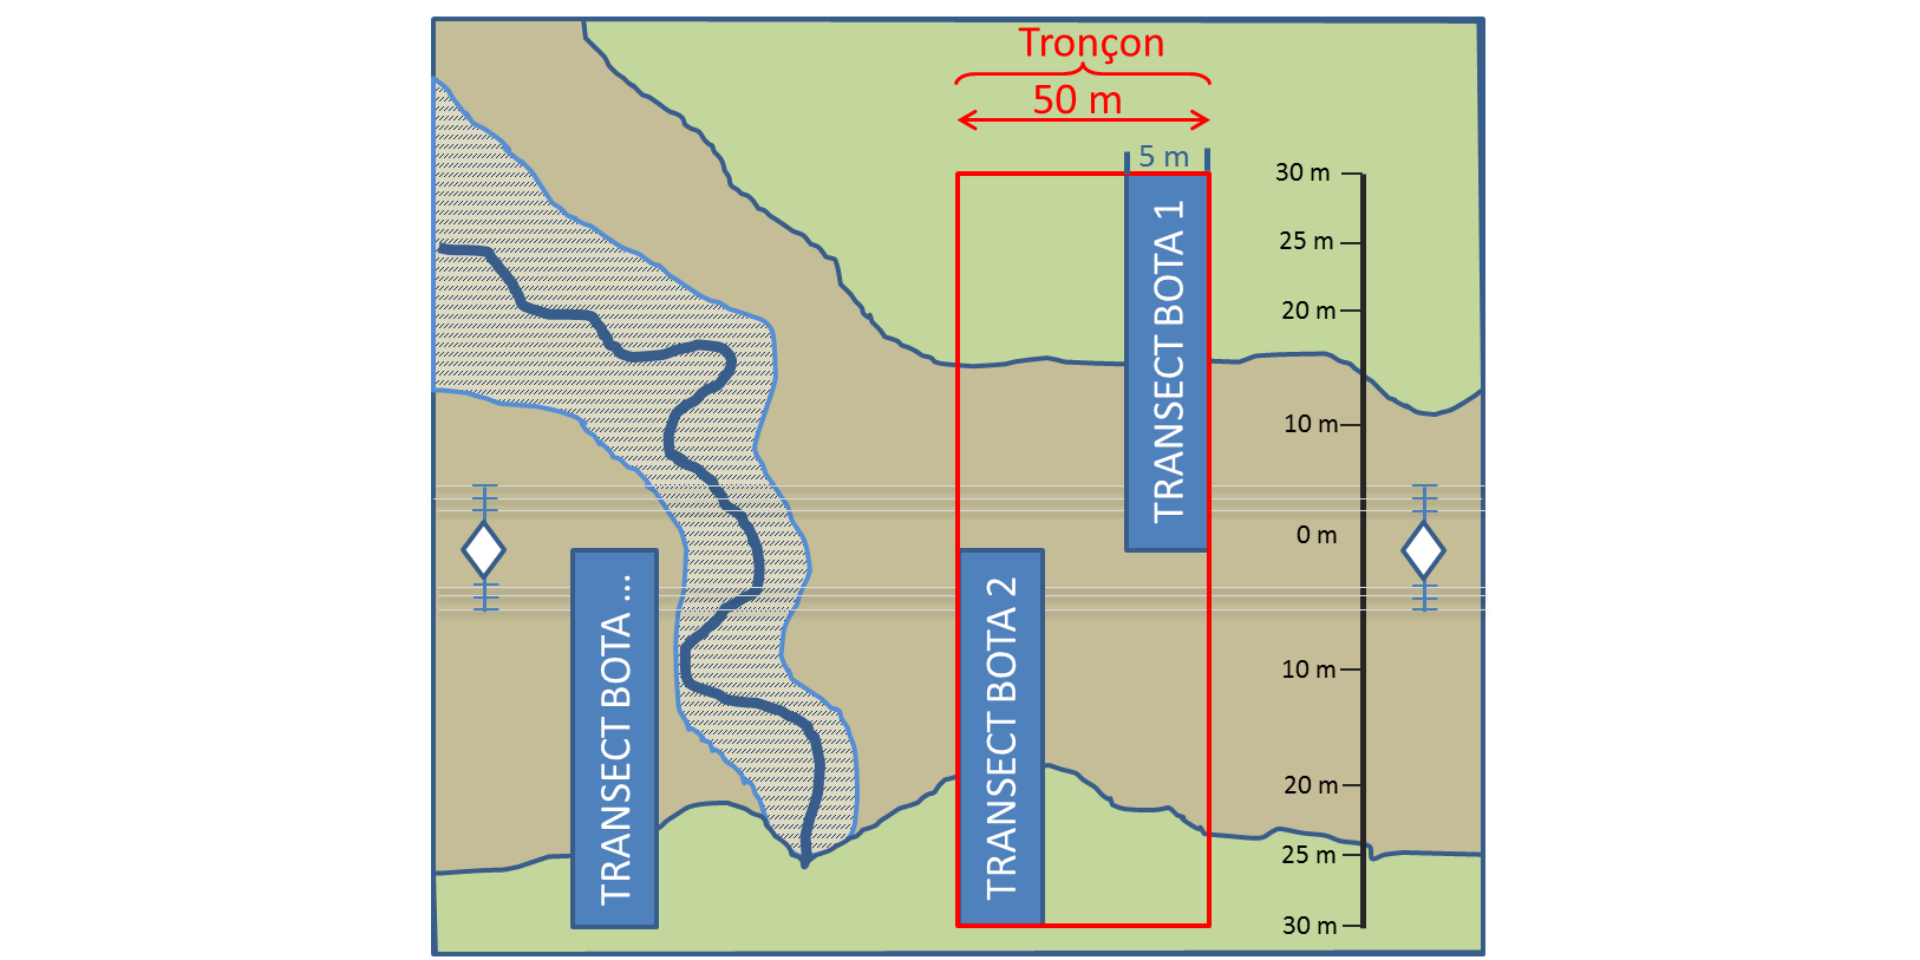 Arrangement of a pair of transects in a homogeneous zone of 50 m. Depending on the extent of the LIFE site, the observer continues to progress to a new representative habitat.